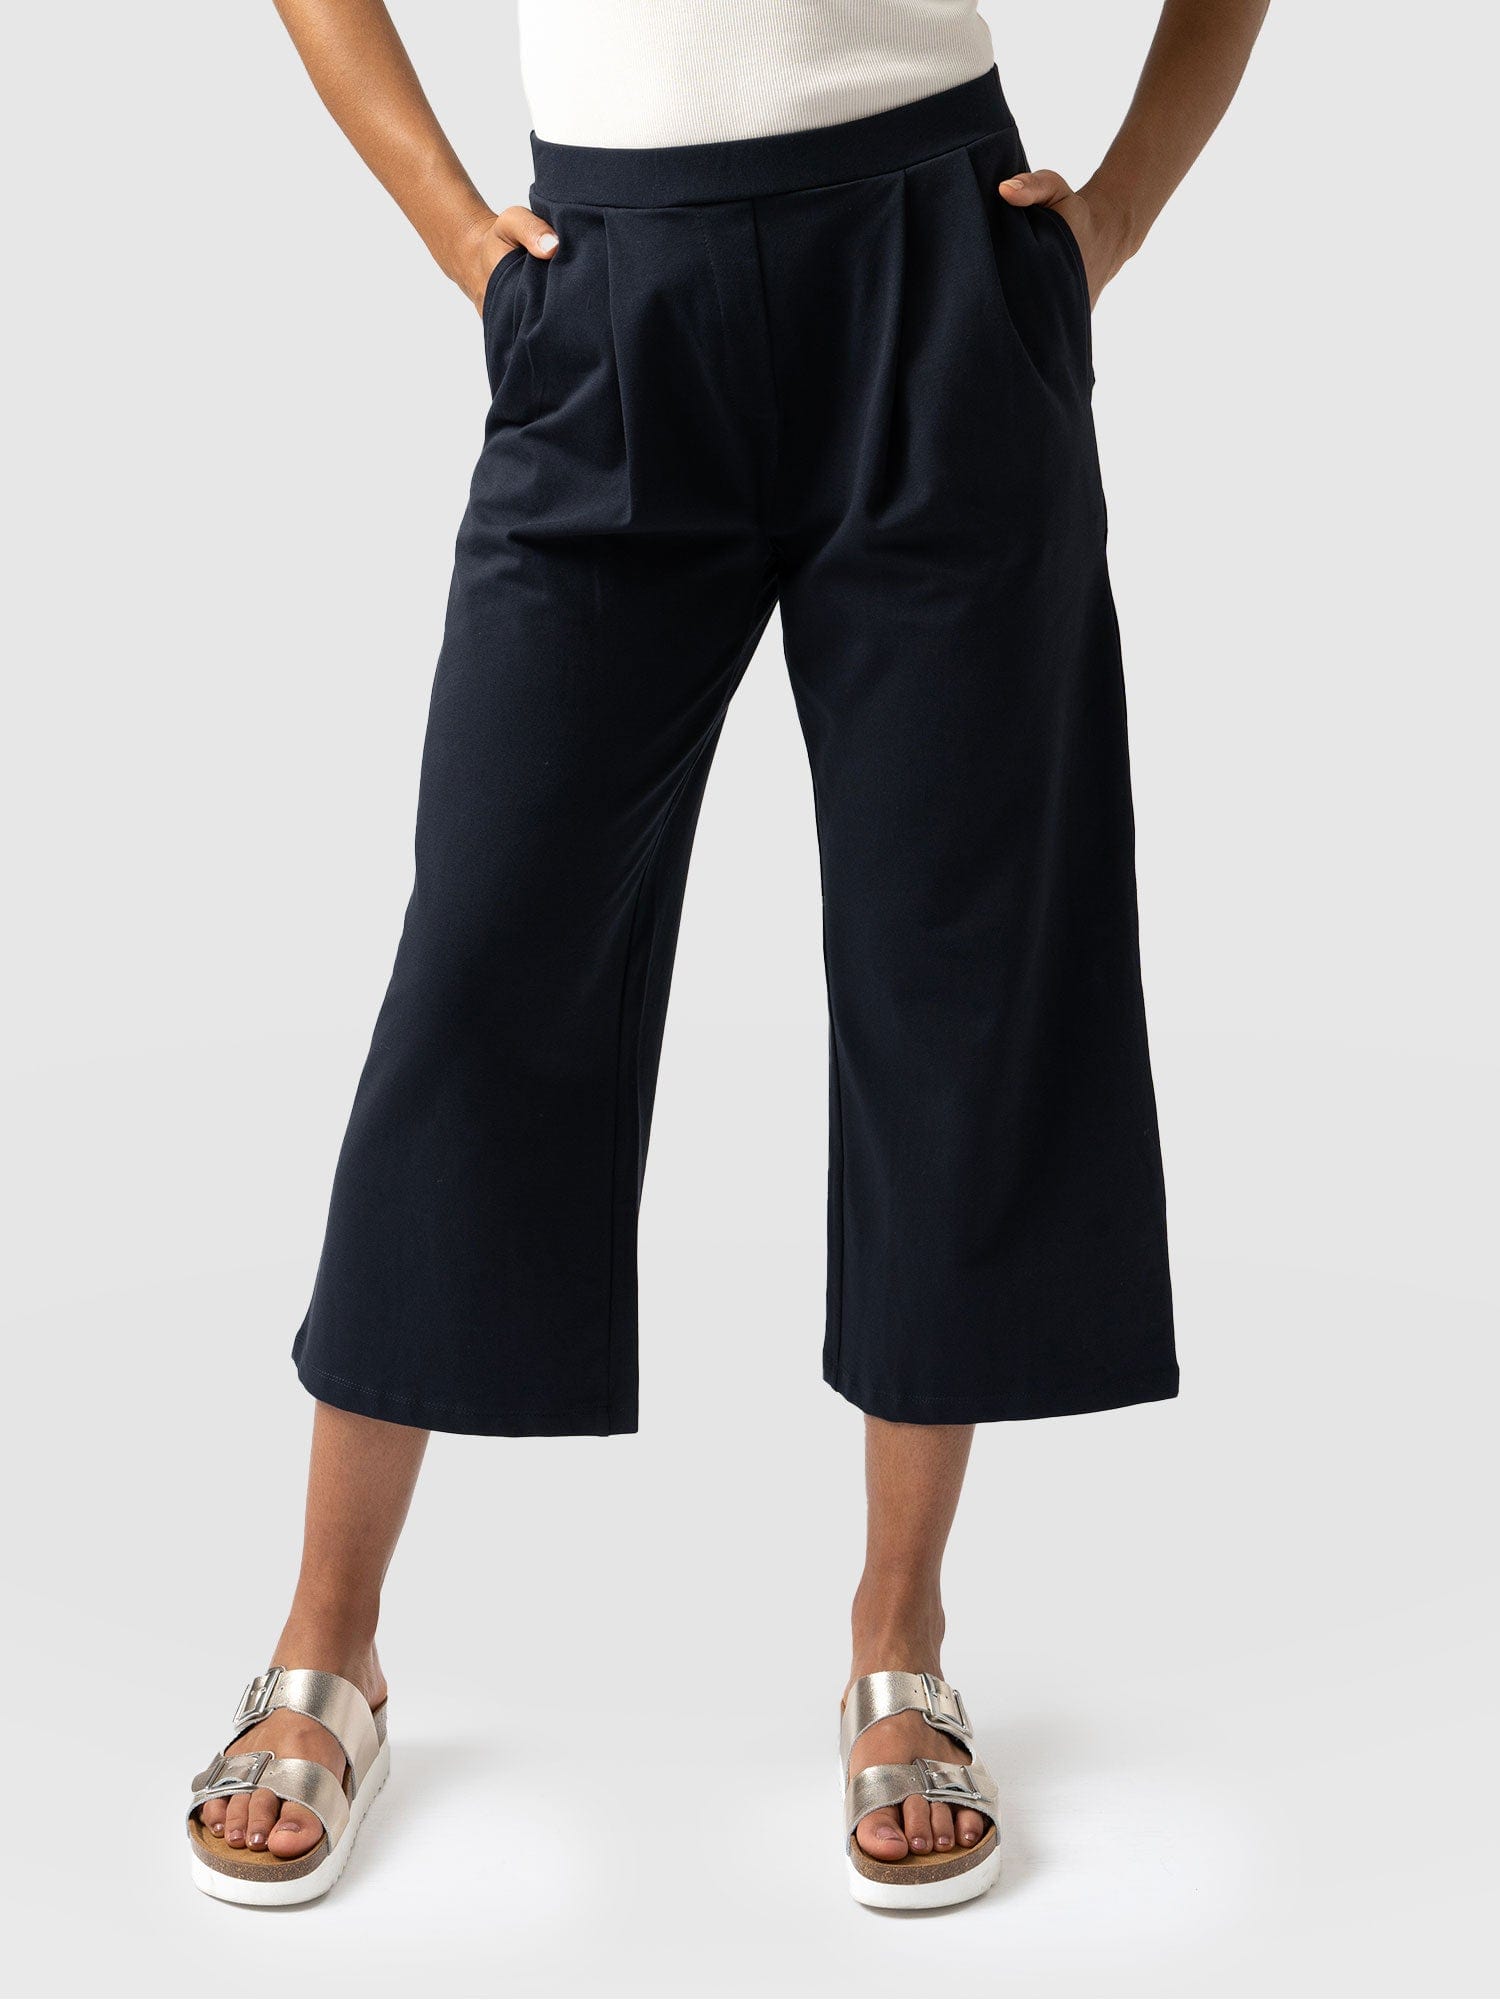 Black Relaxed Fit Culotte Trousers